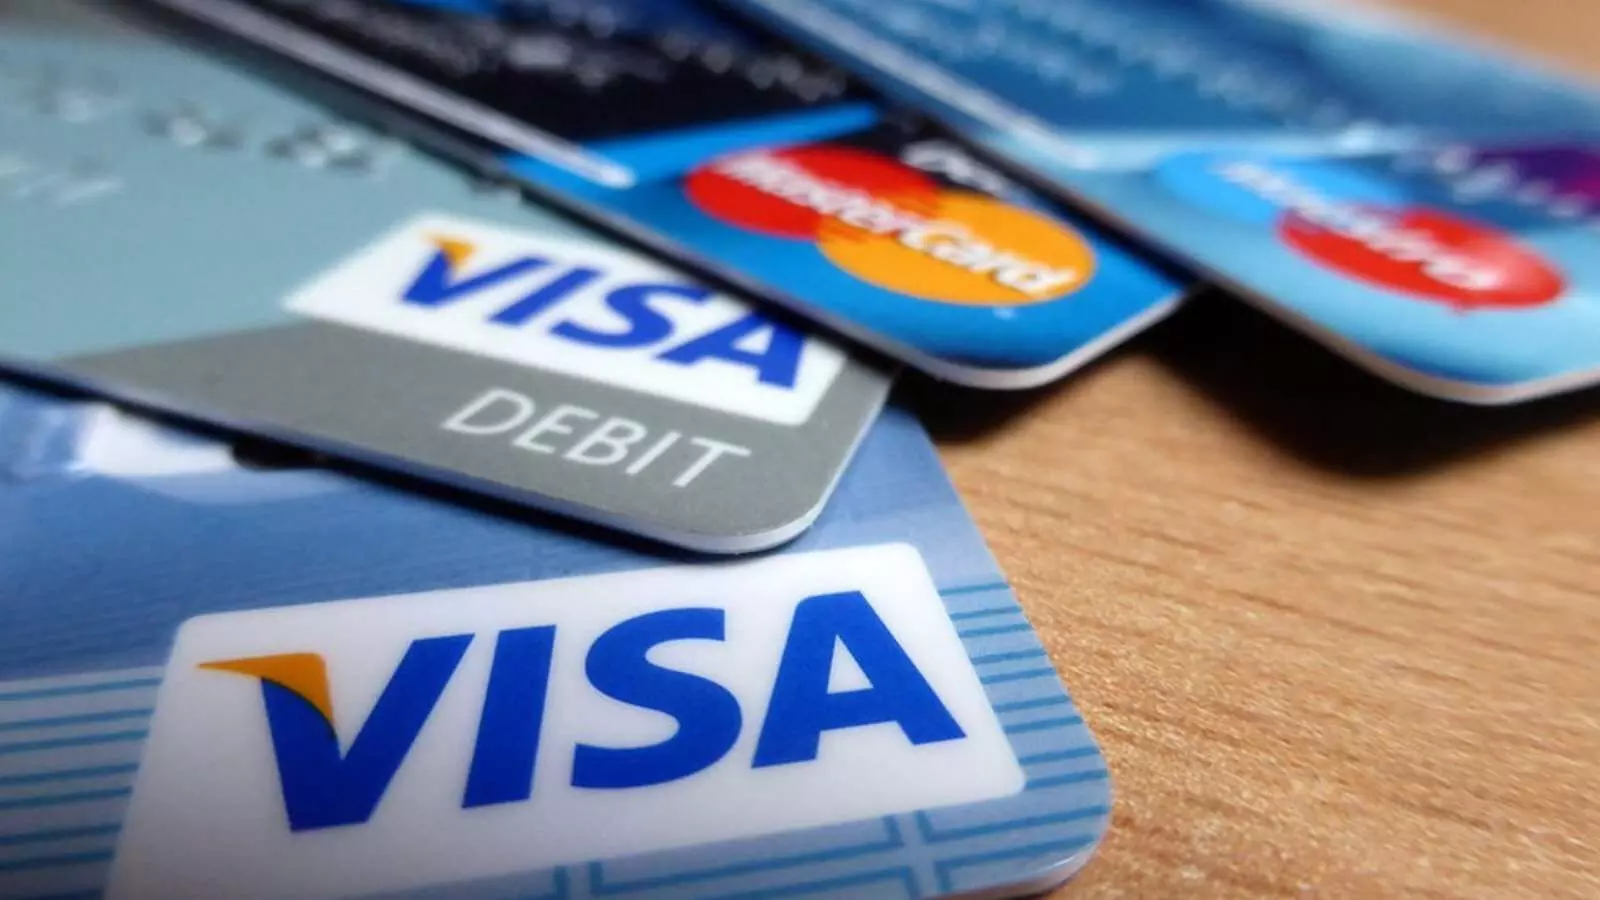 credit card spends hit record rs 1 16 lakh crore spent in July 2022